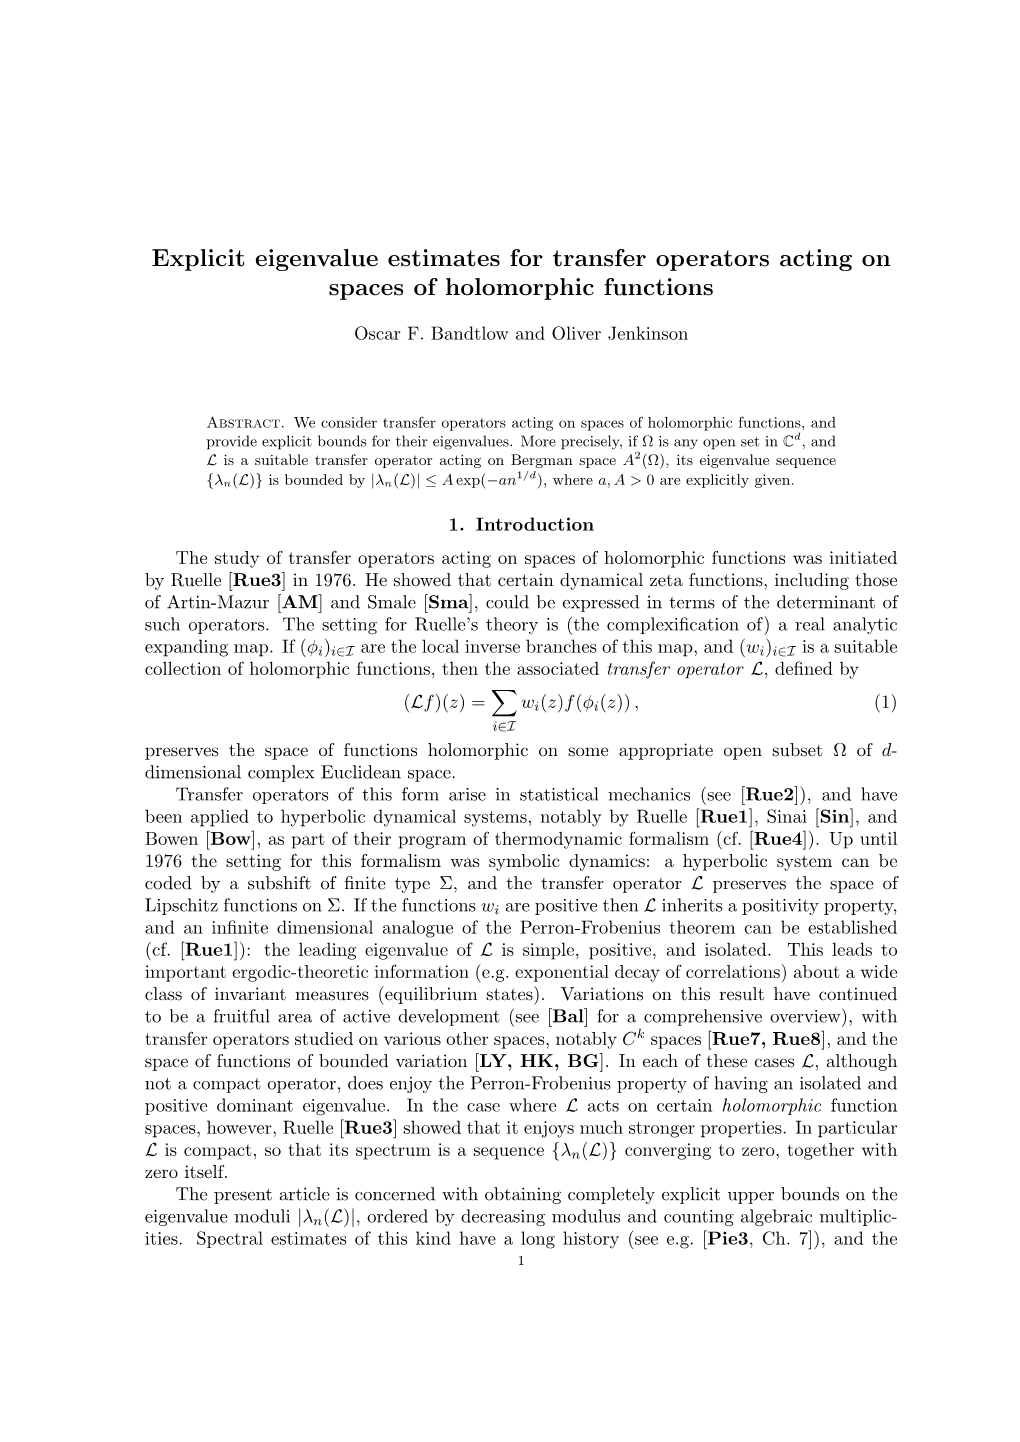 Explicit Eigenvalue Estimates for Transfer Operators Acting on Spaces of Holomorphic Functions